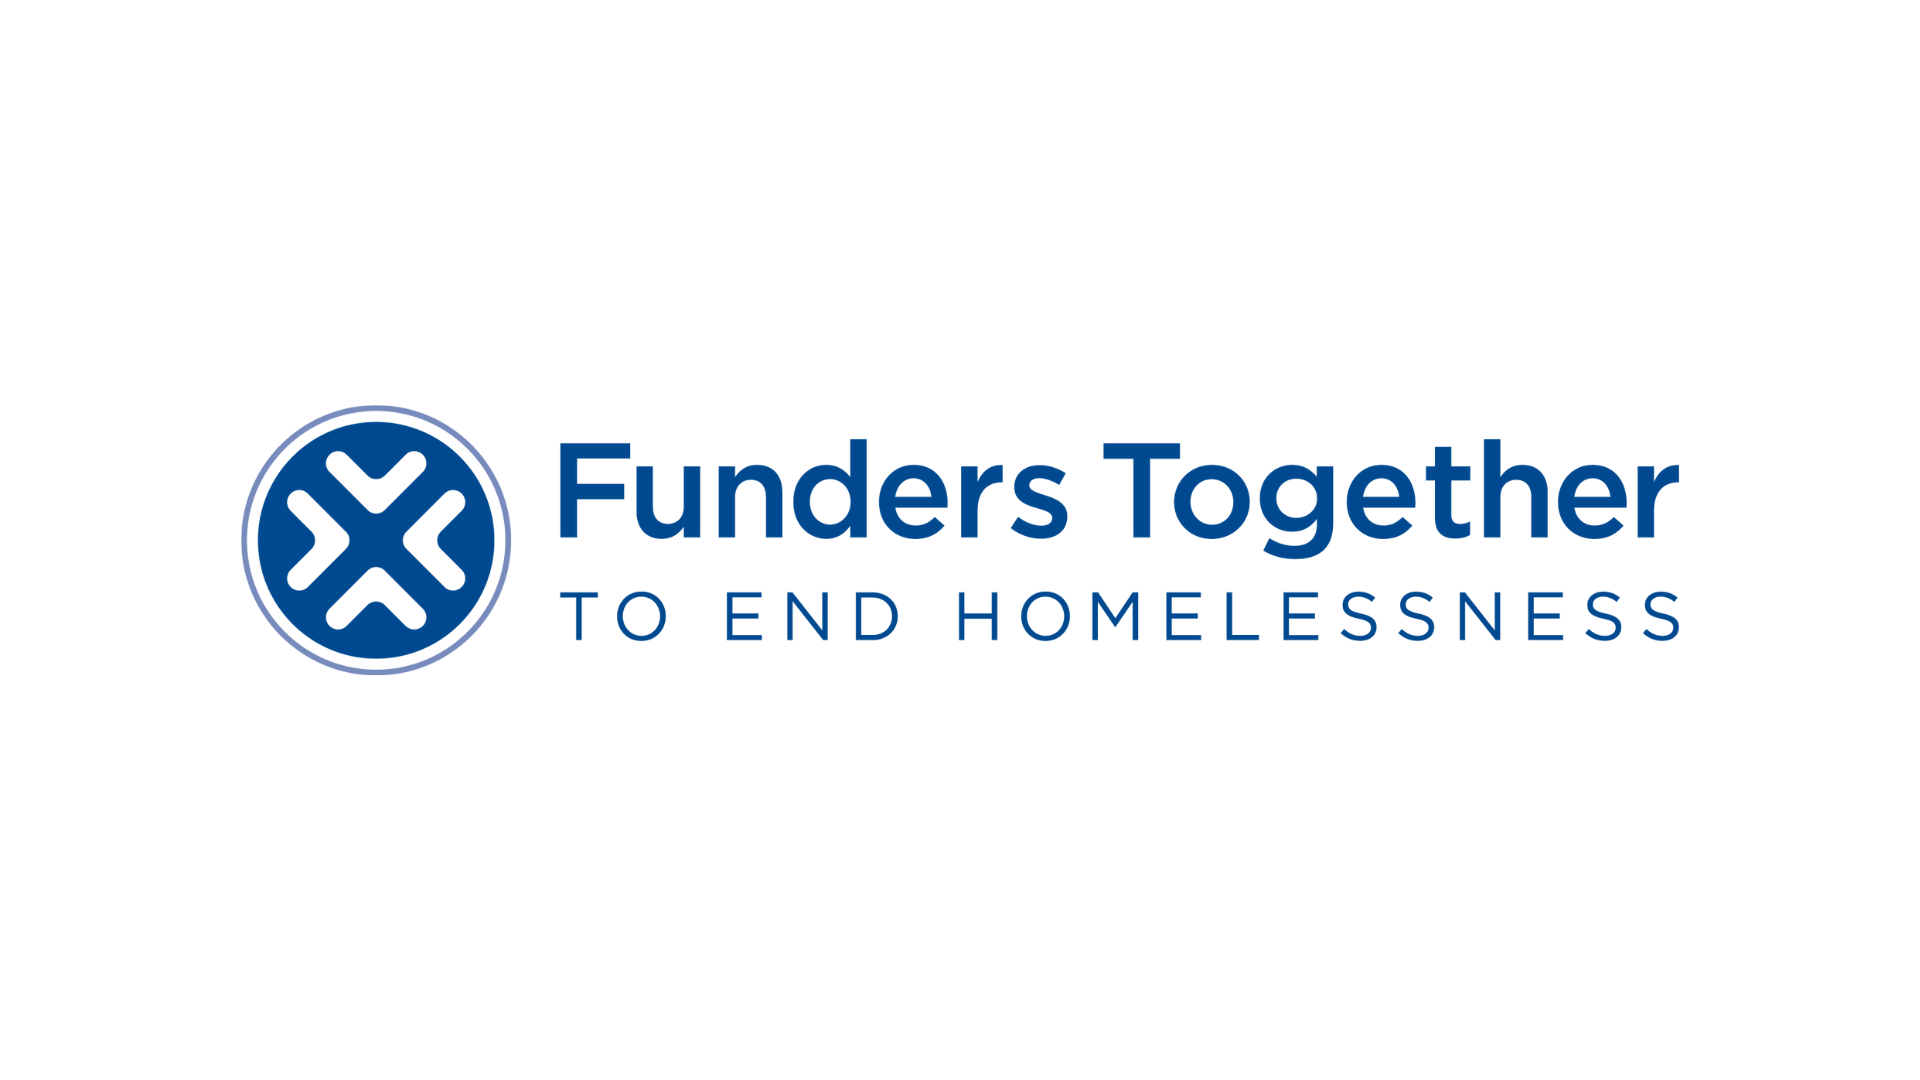 Funders Together